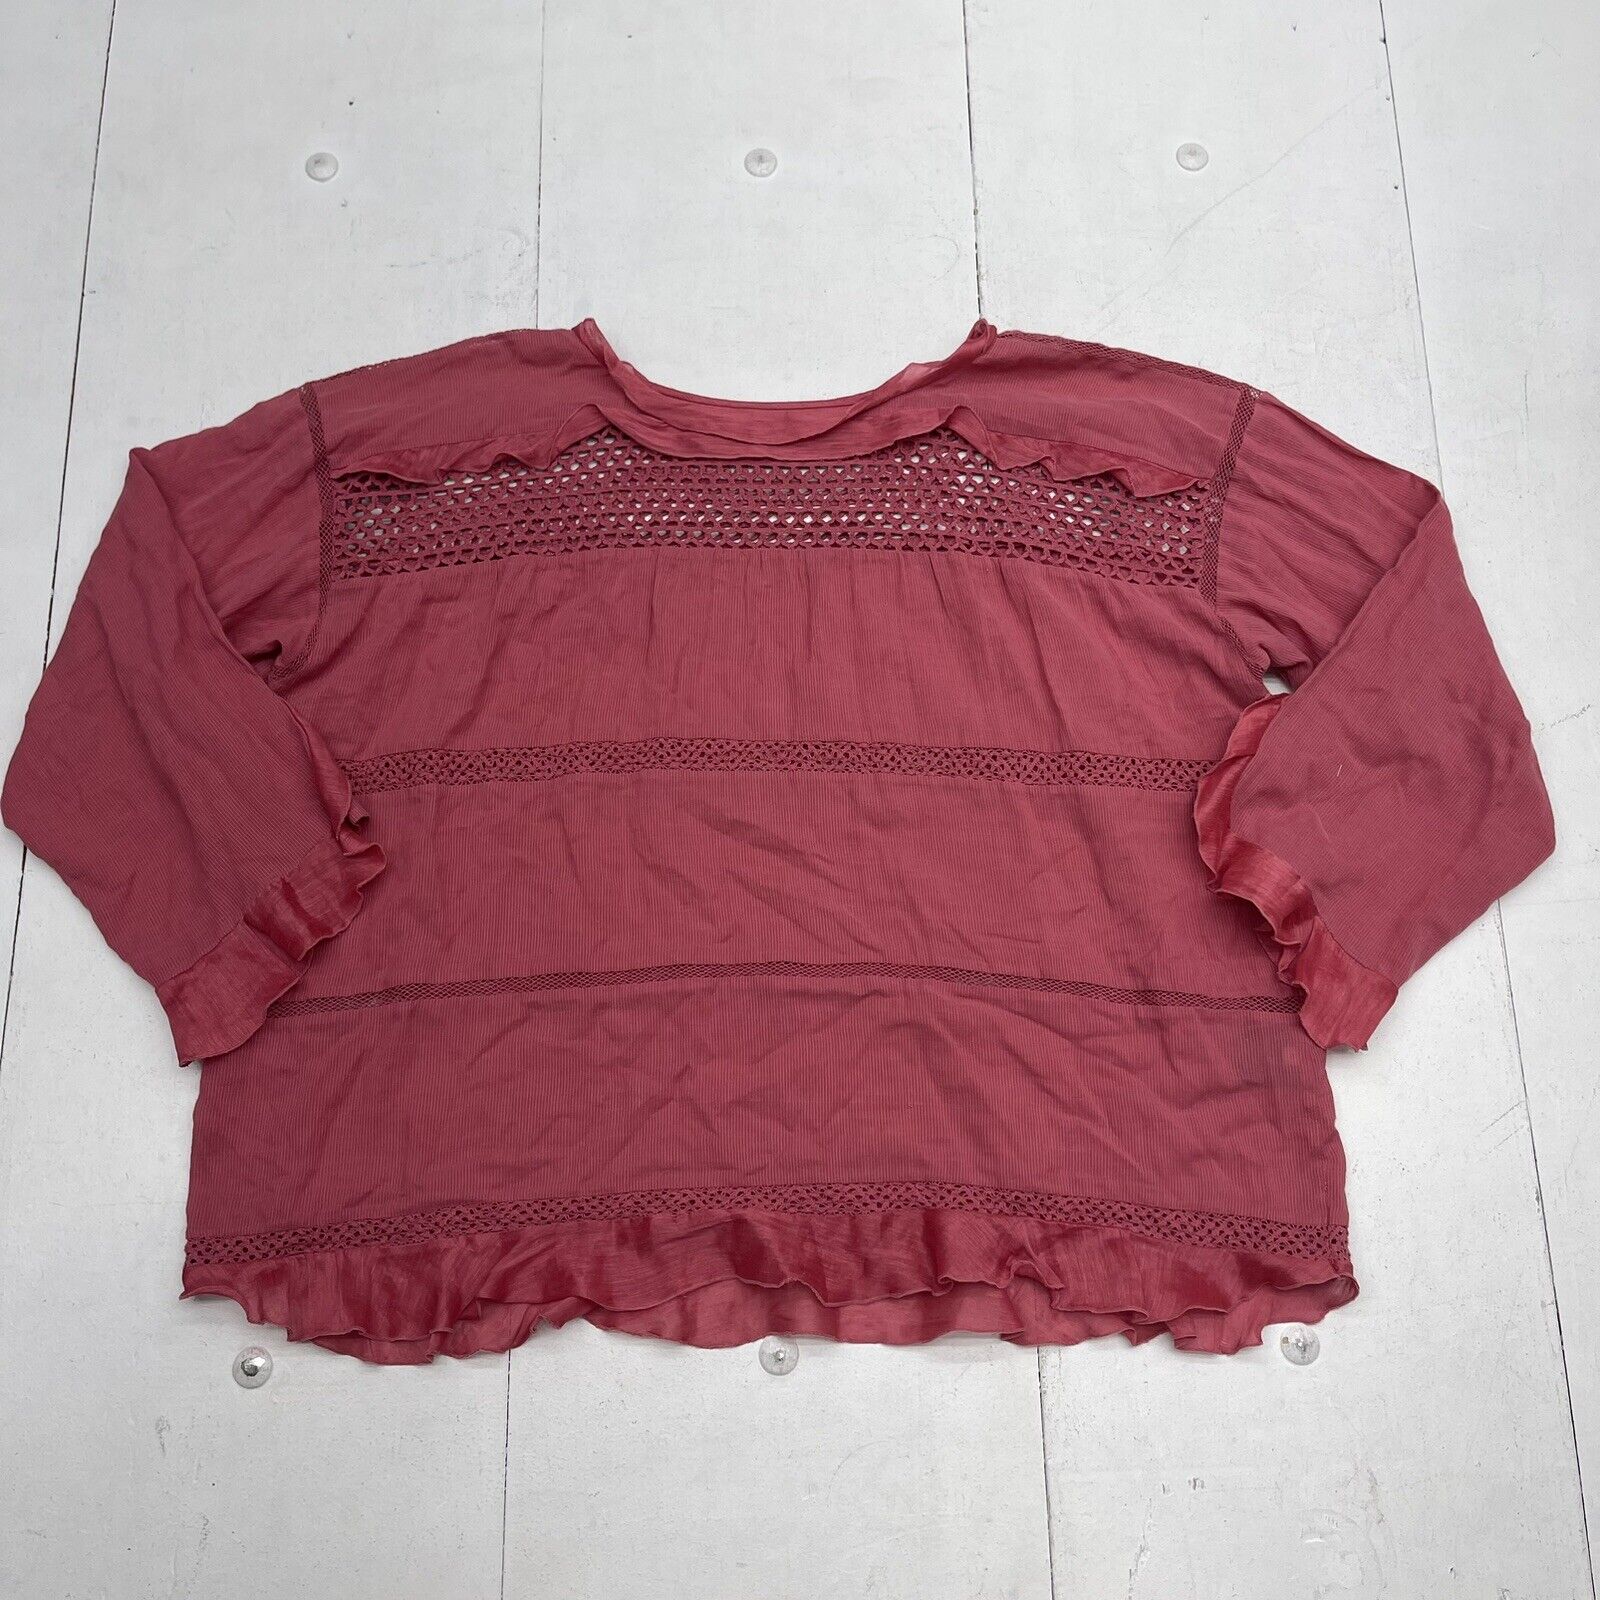 Isabel Marant Chay Striped Lattice Inset Blouse Cranberry Pink Women’s 42 US 10